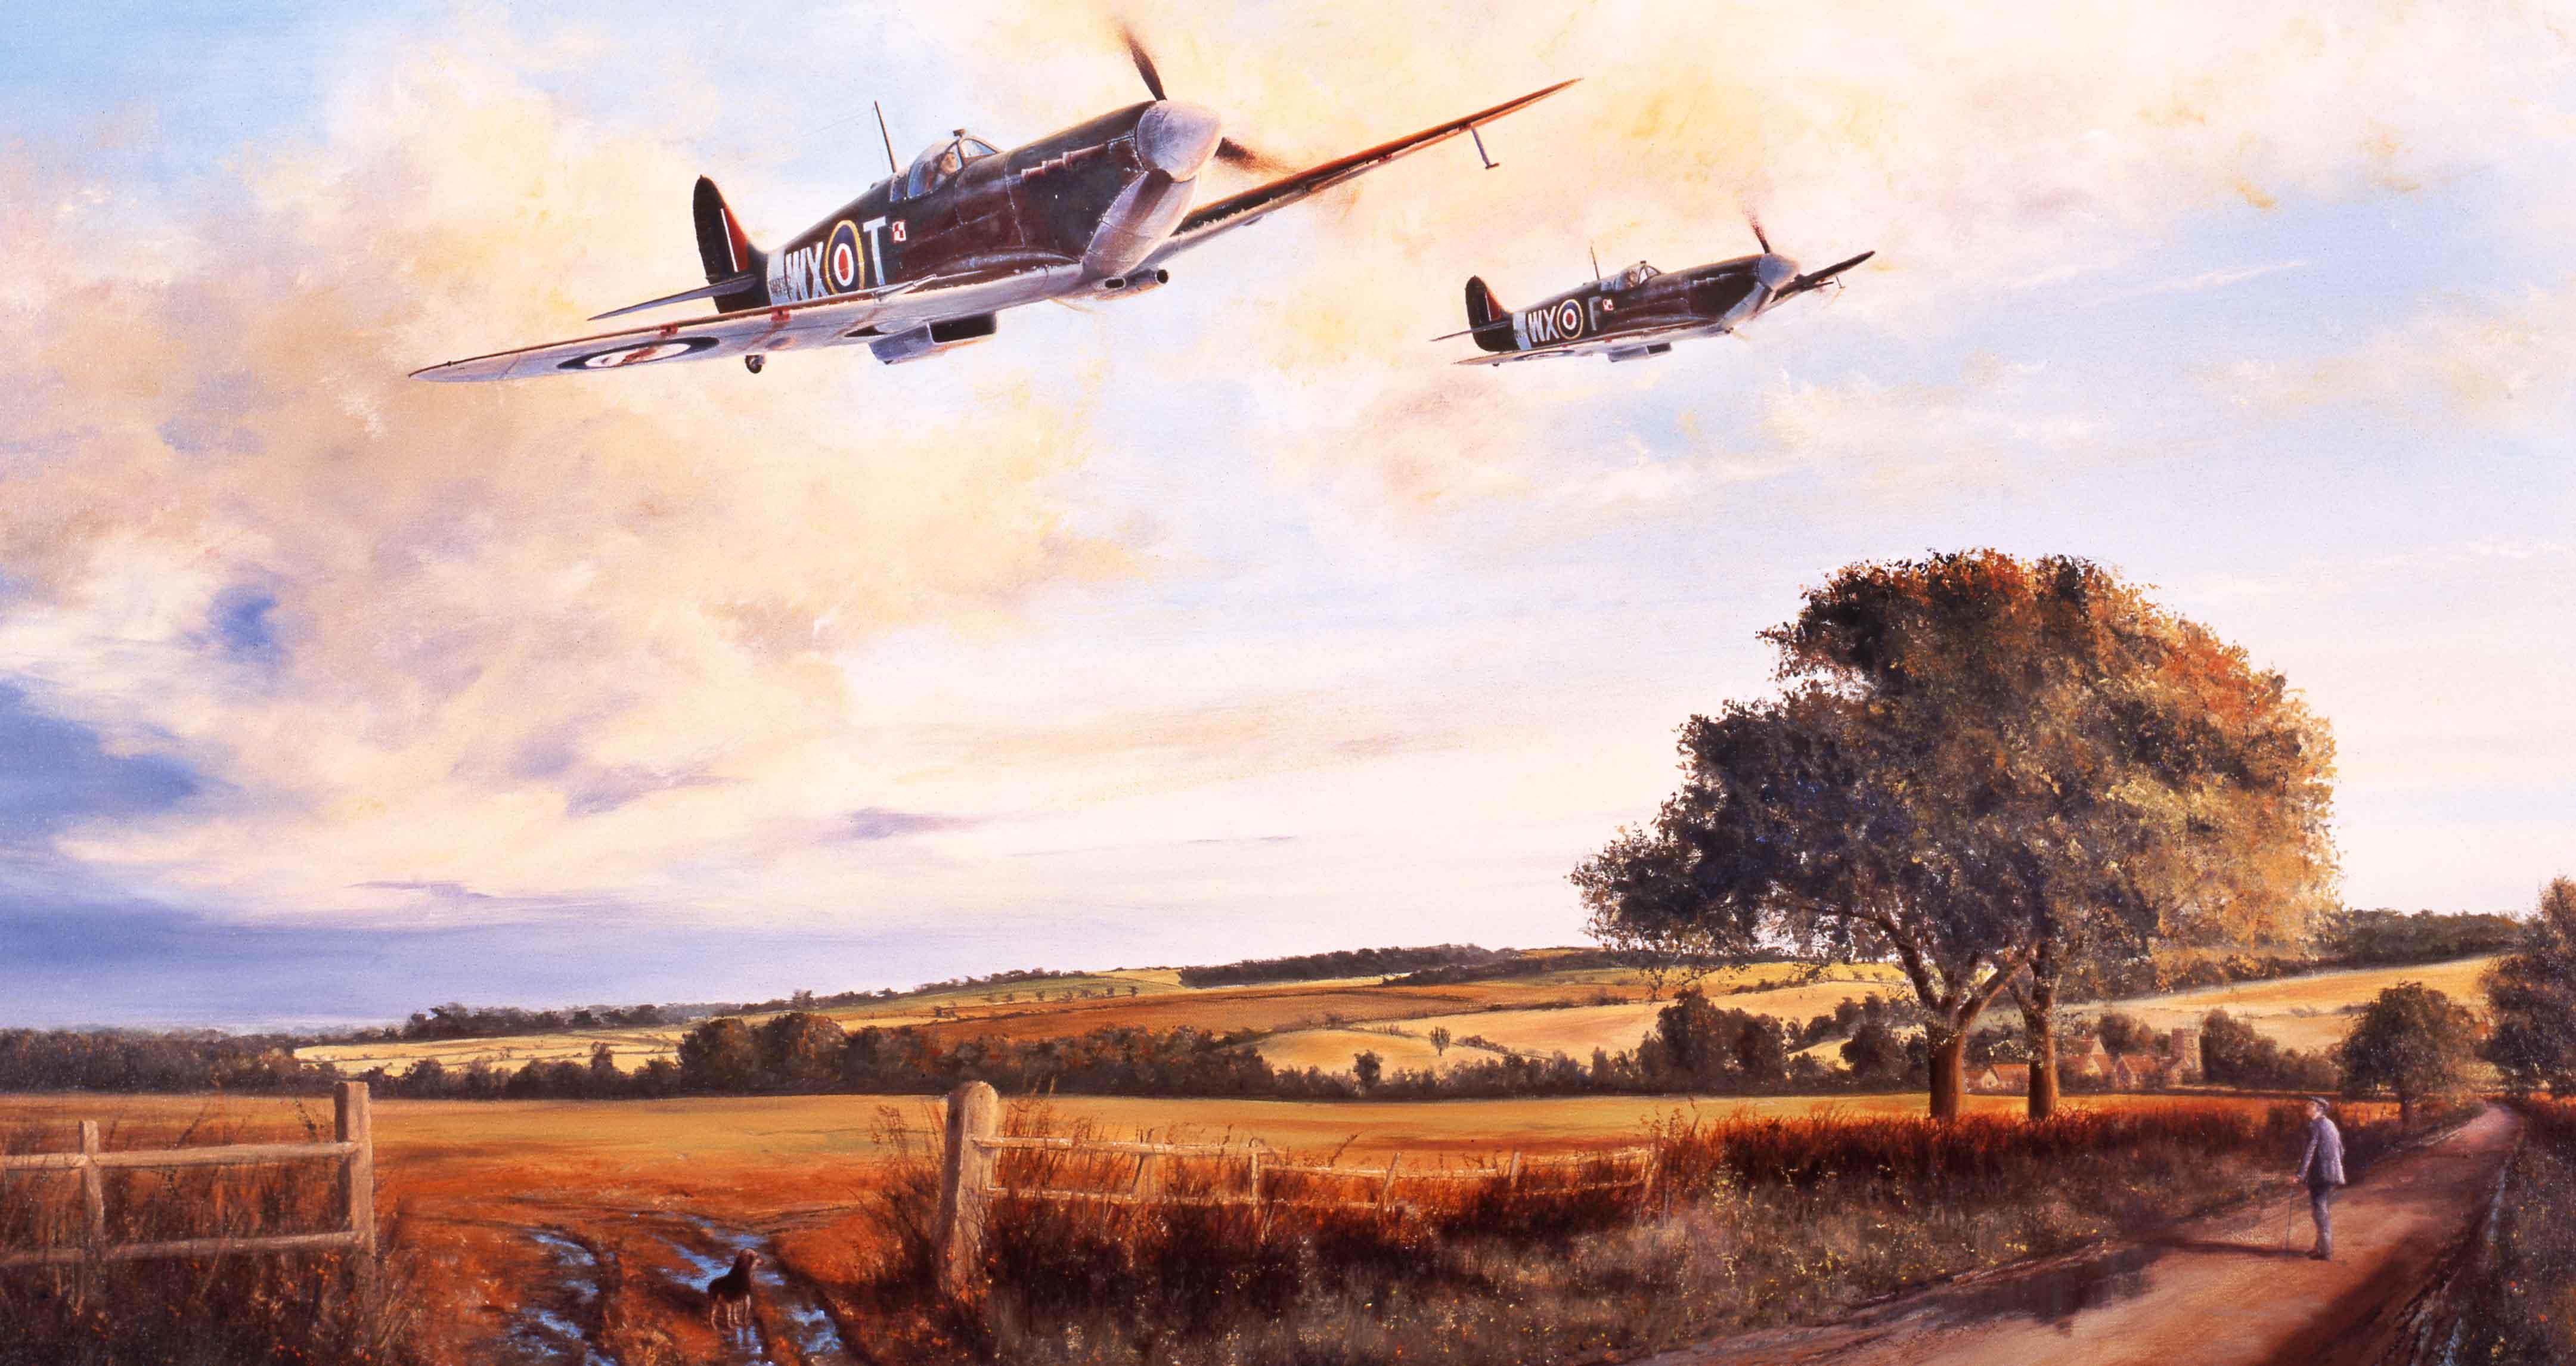 Spitfires of 309 Squadron by Stephen Brown